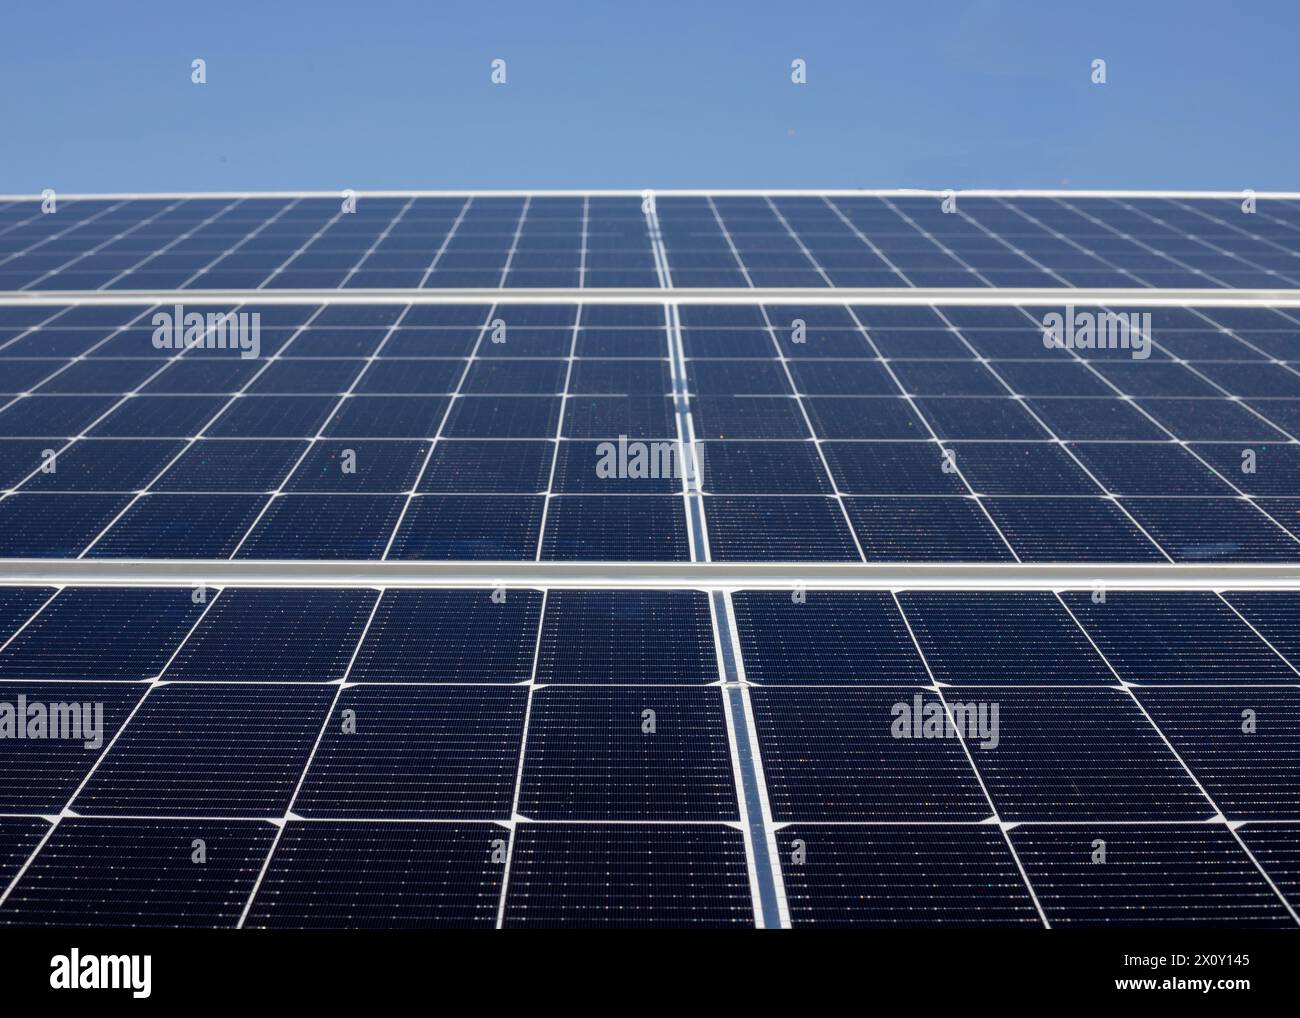 Solar panels with a blue sky background. Alternative clean electricity source in Pakistan. Stock Photo